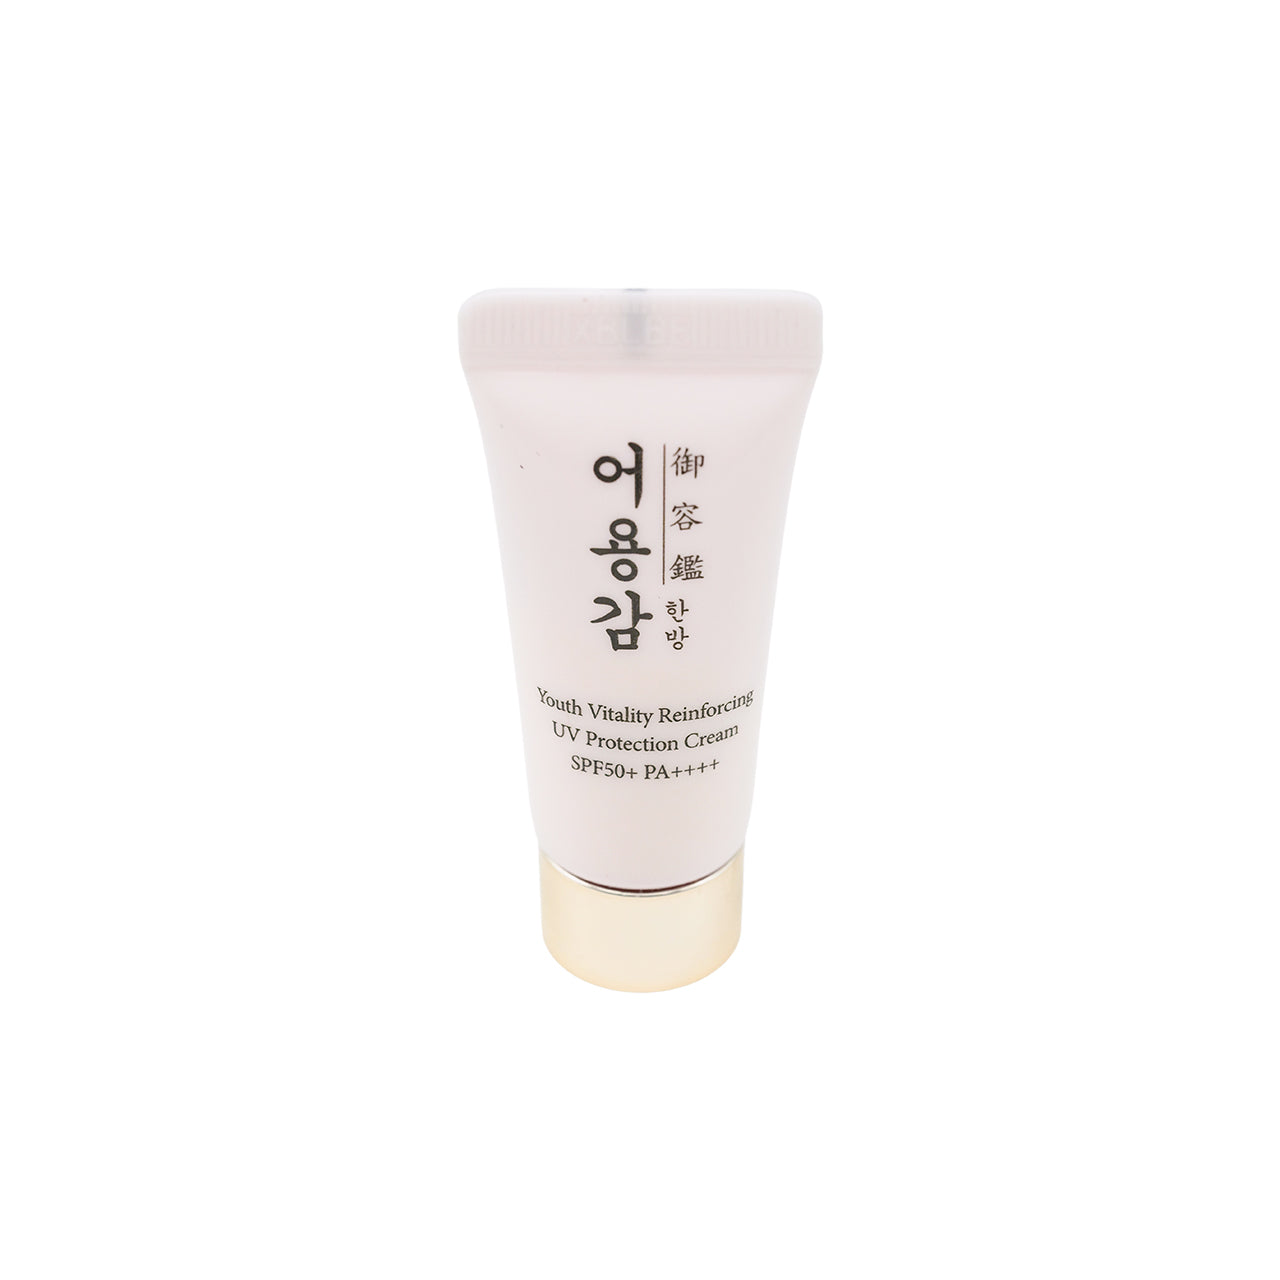 Eoyunggam Youth Vitality SPF50+ PA++++ Reinforcing UV Protection Cream 5ml